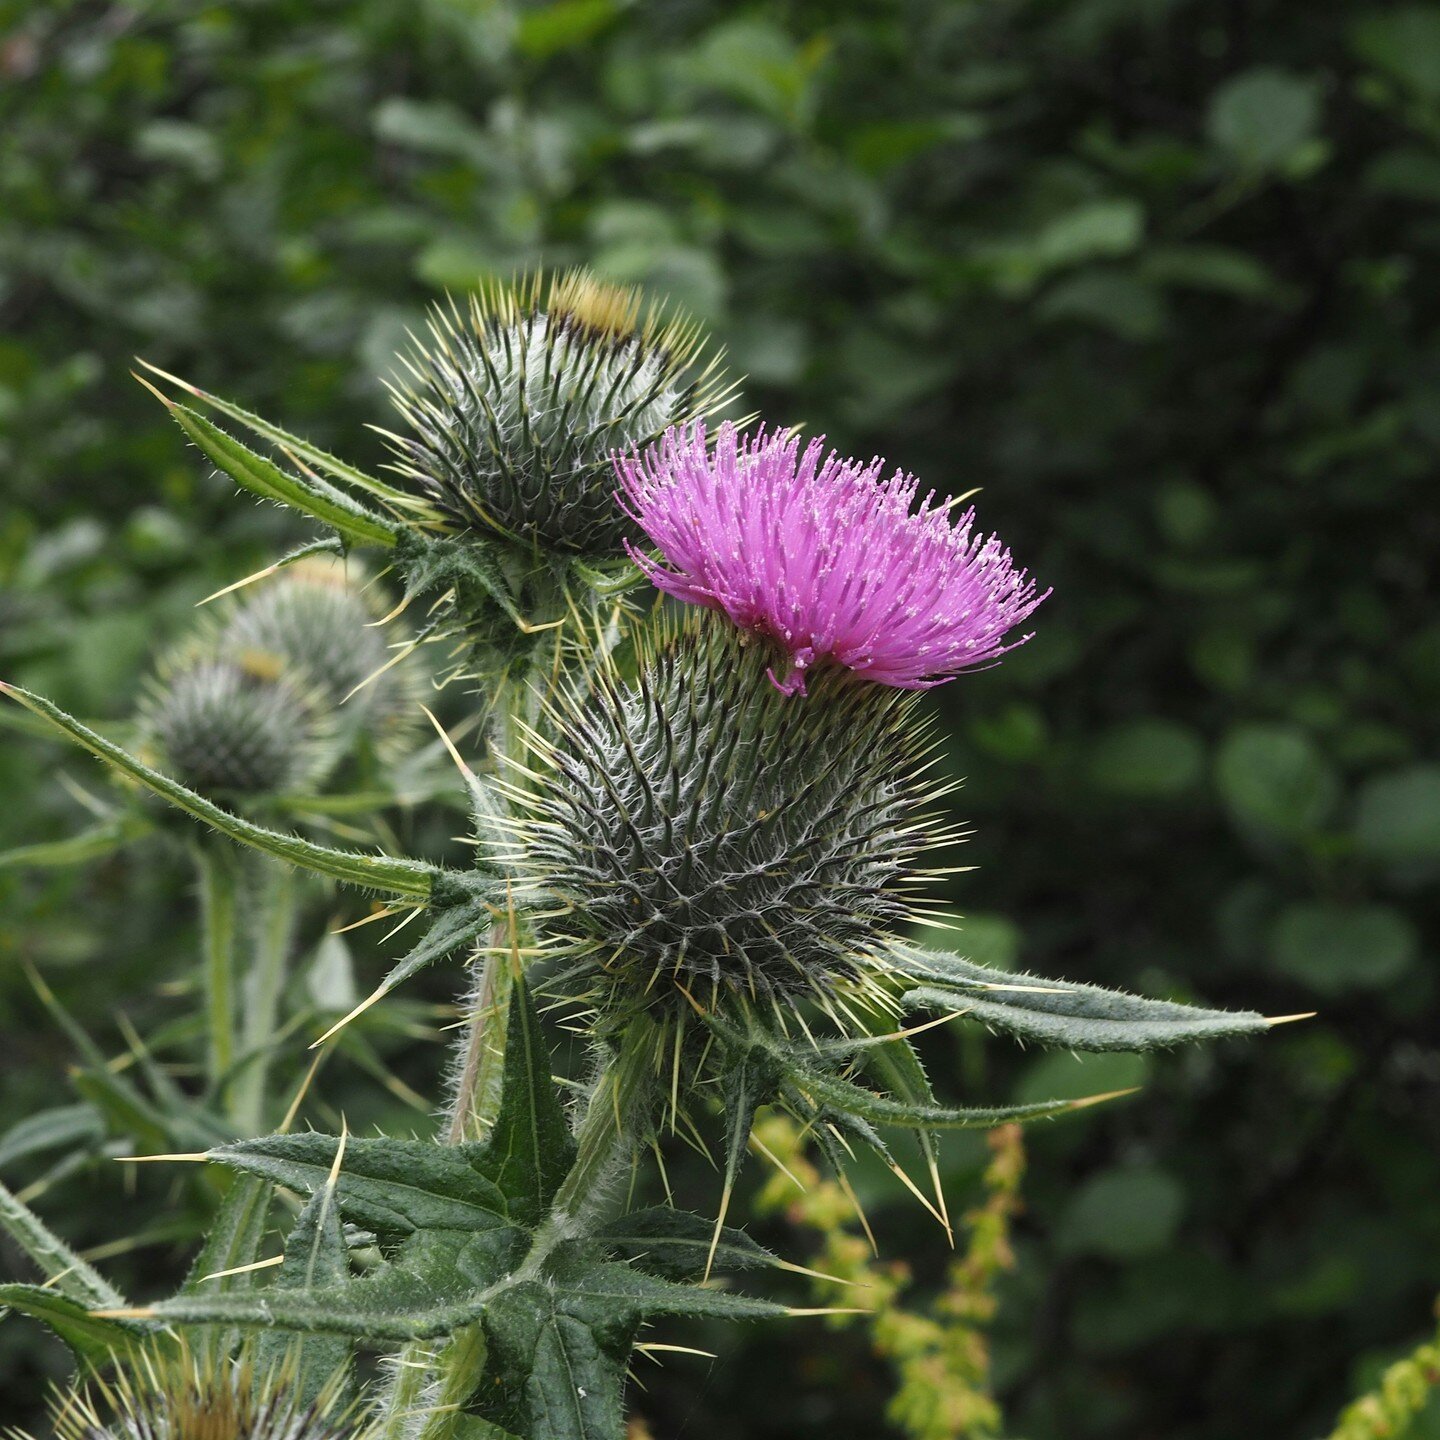 No one is truly sure of how the #thistle came to be #Scotland&rsquo;s national #flower. A well known story though attributes the thistle being chosen as the emblem of Scotland to the Battle of Largs, Ayrshire in the 13th century. A #Norse army journe